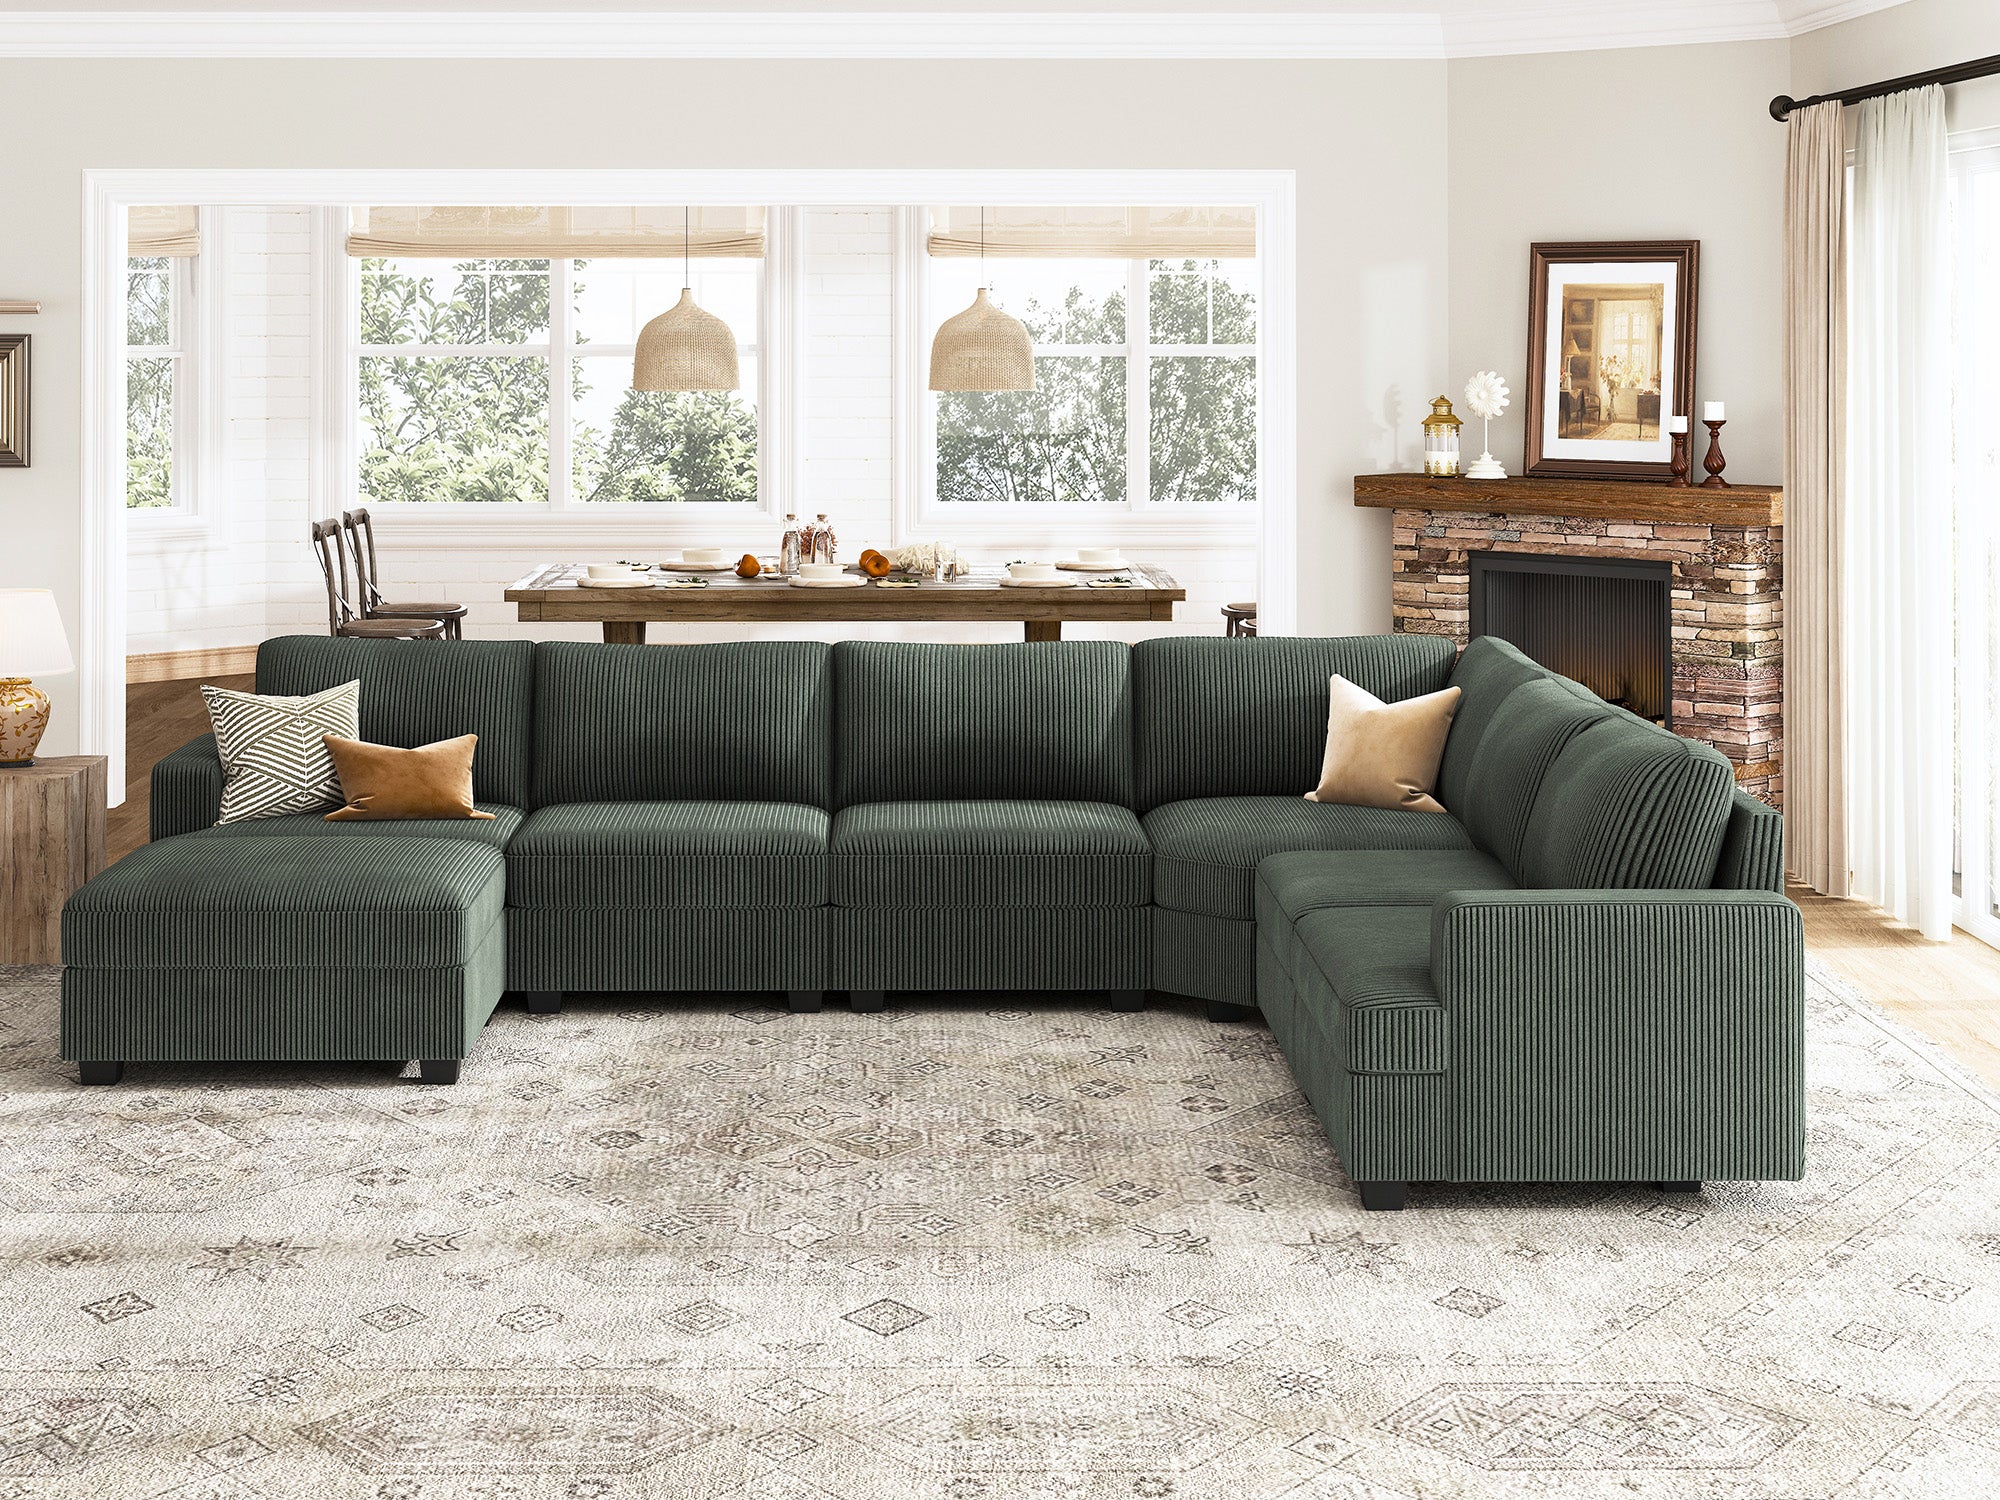 HONBAY 7-Piece Corduroy Modular Lindyn Sectional With Storage Ottoman #Color_Corduroy Green